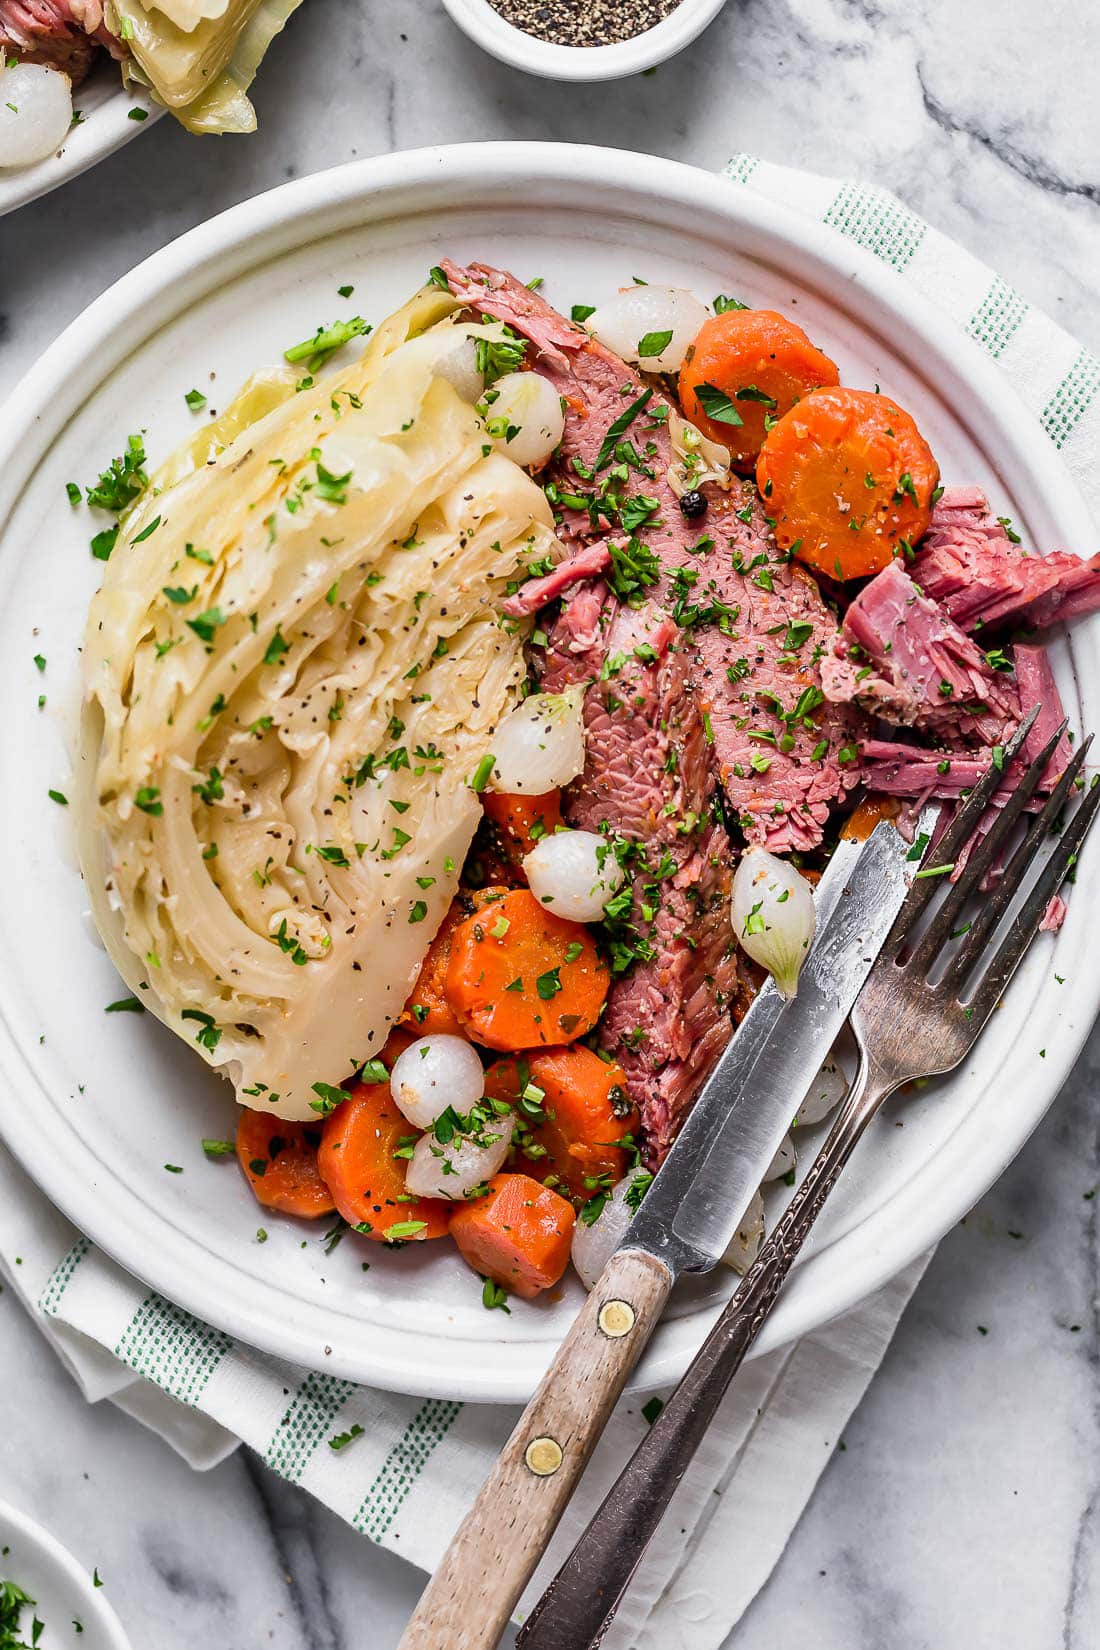 A plate of Instant Pot corned beef with cabbage, carrots and onions